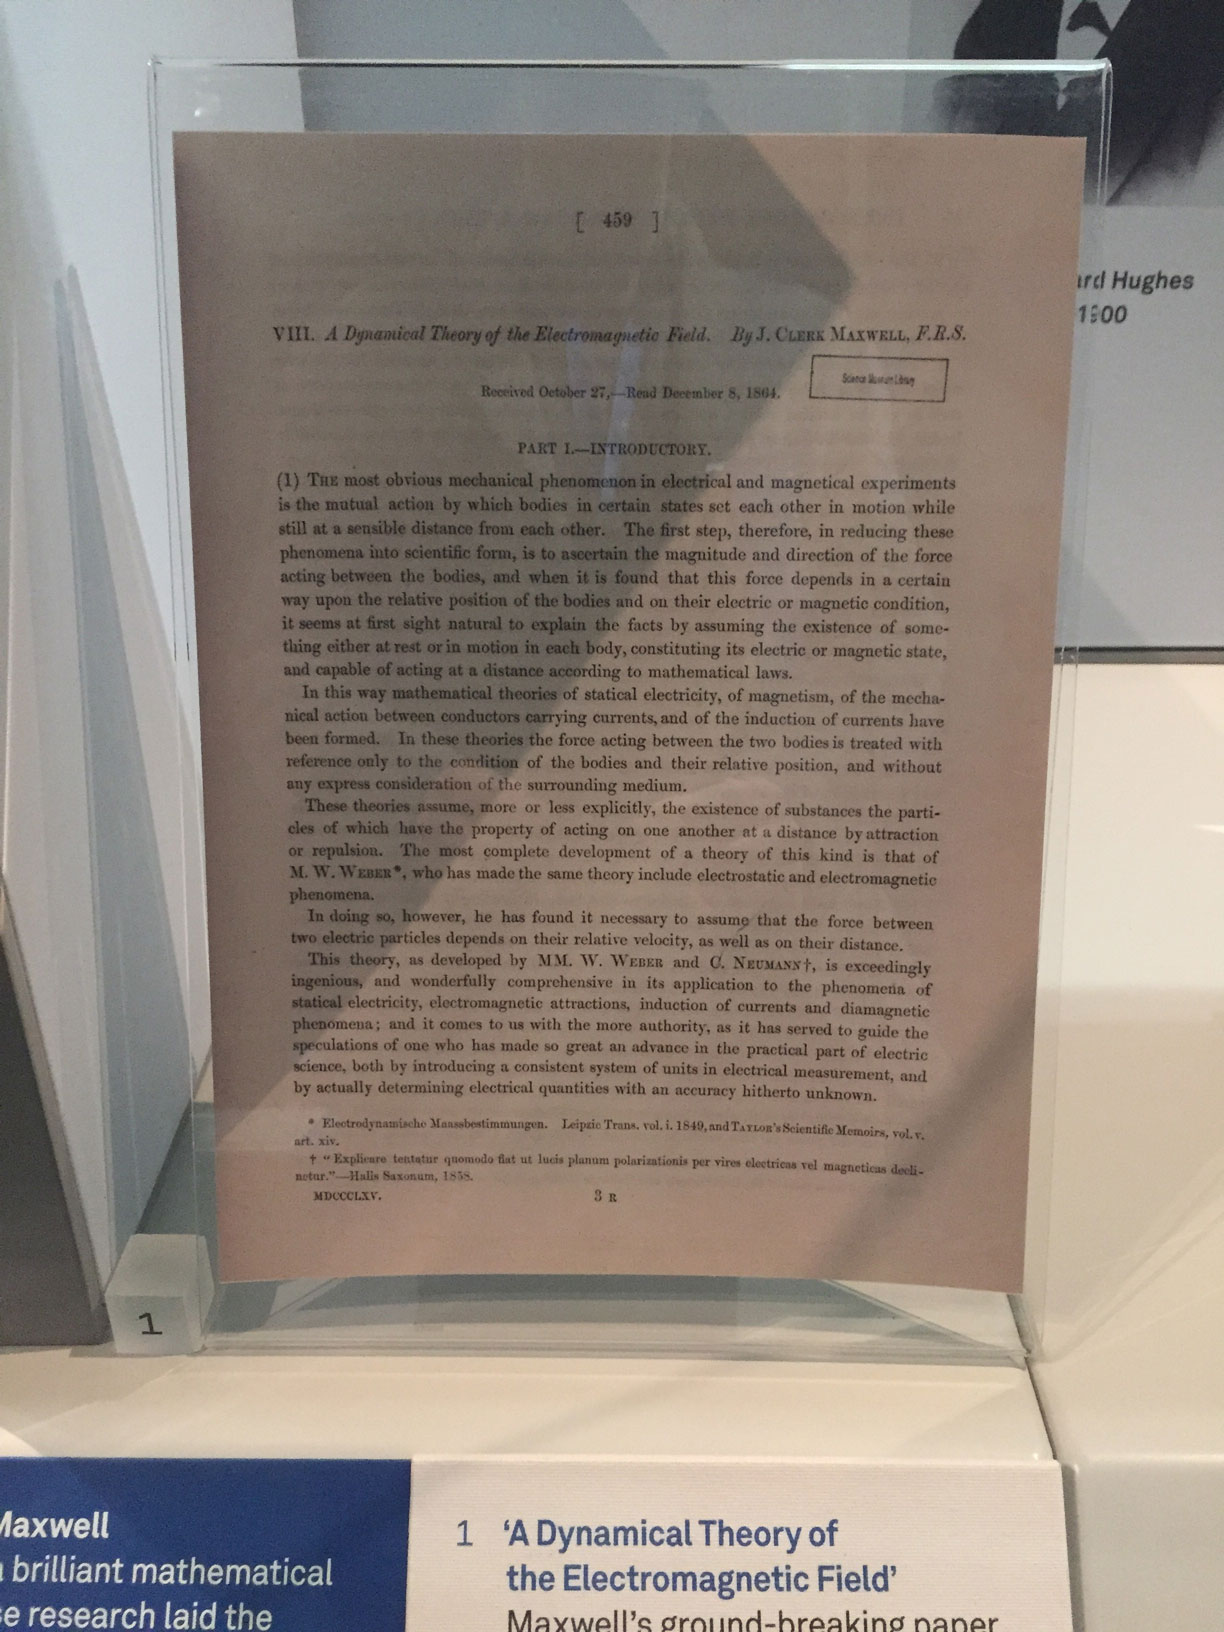 A facsimile of Maxwell's 'A Dynamical Theory of the Electromagnetic Field' on display in the Science Museum’s new Information Age gallery.